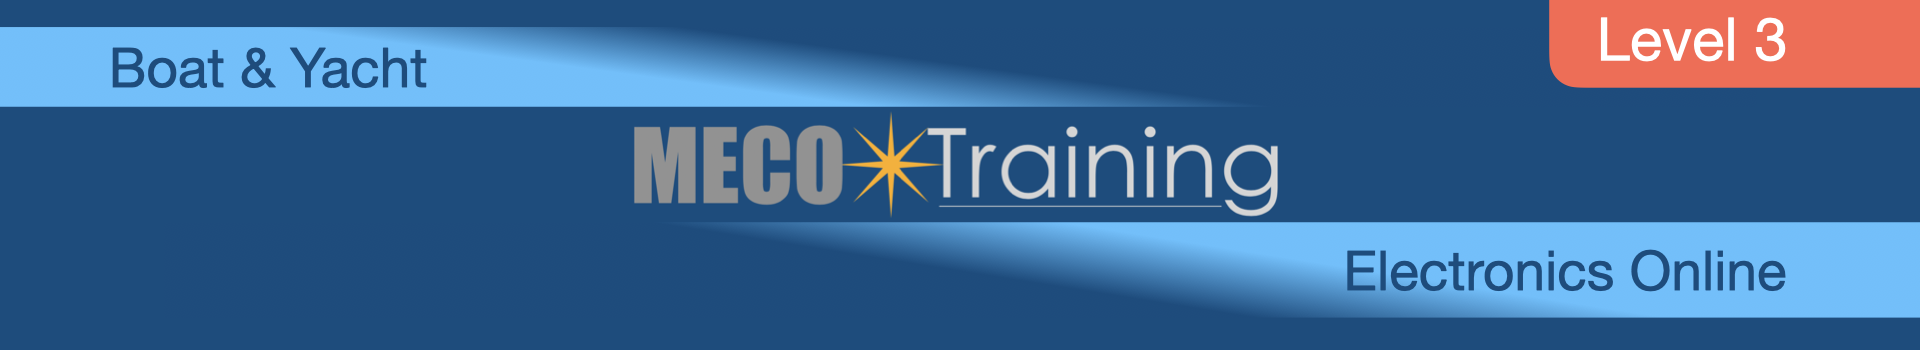 Boat Electronics Course Online from MECO Training